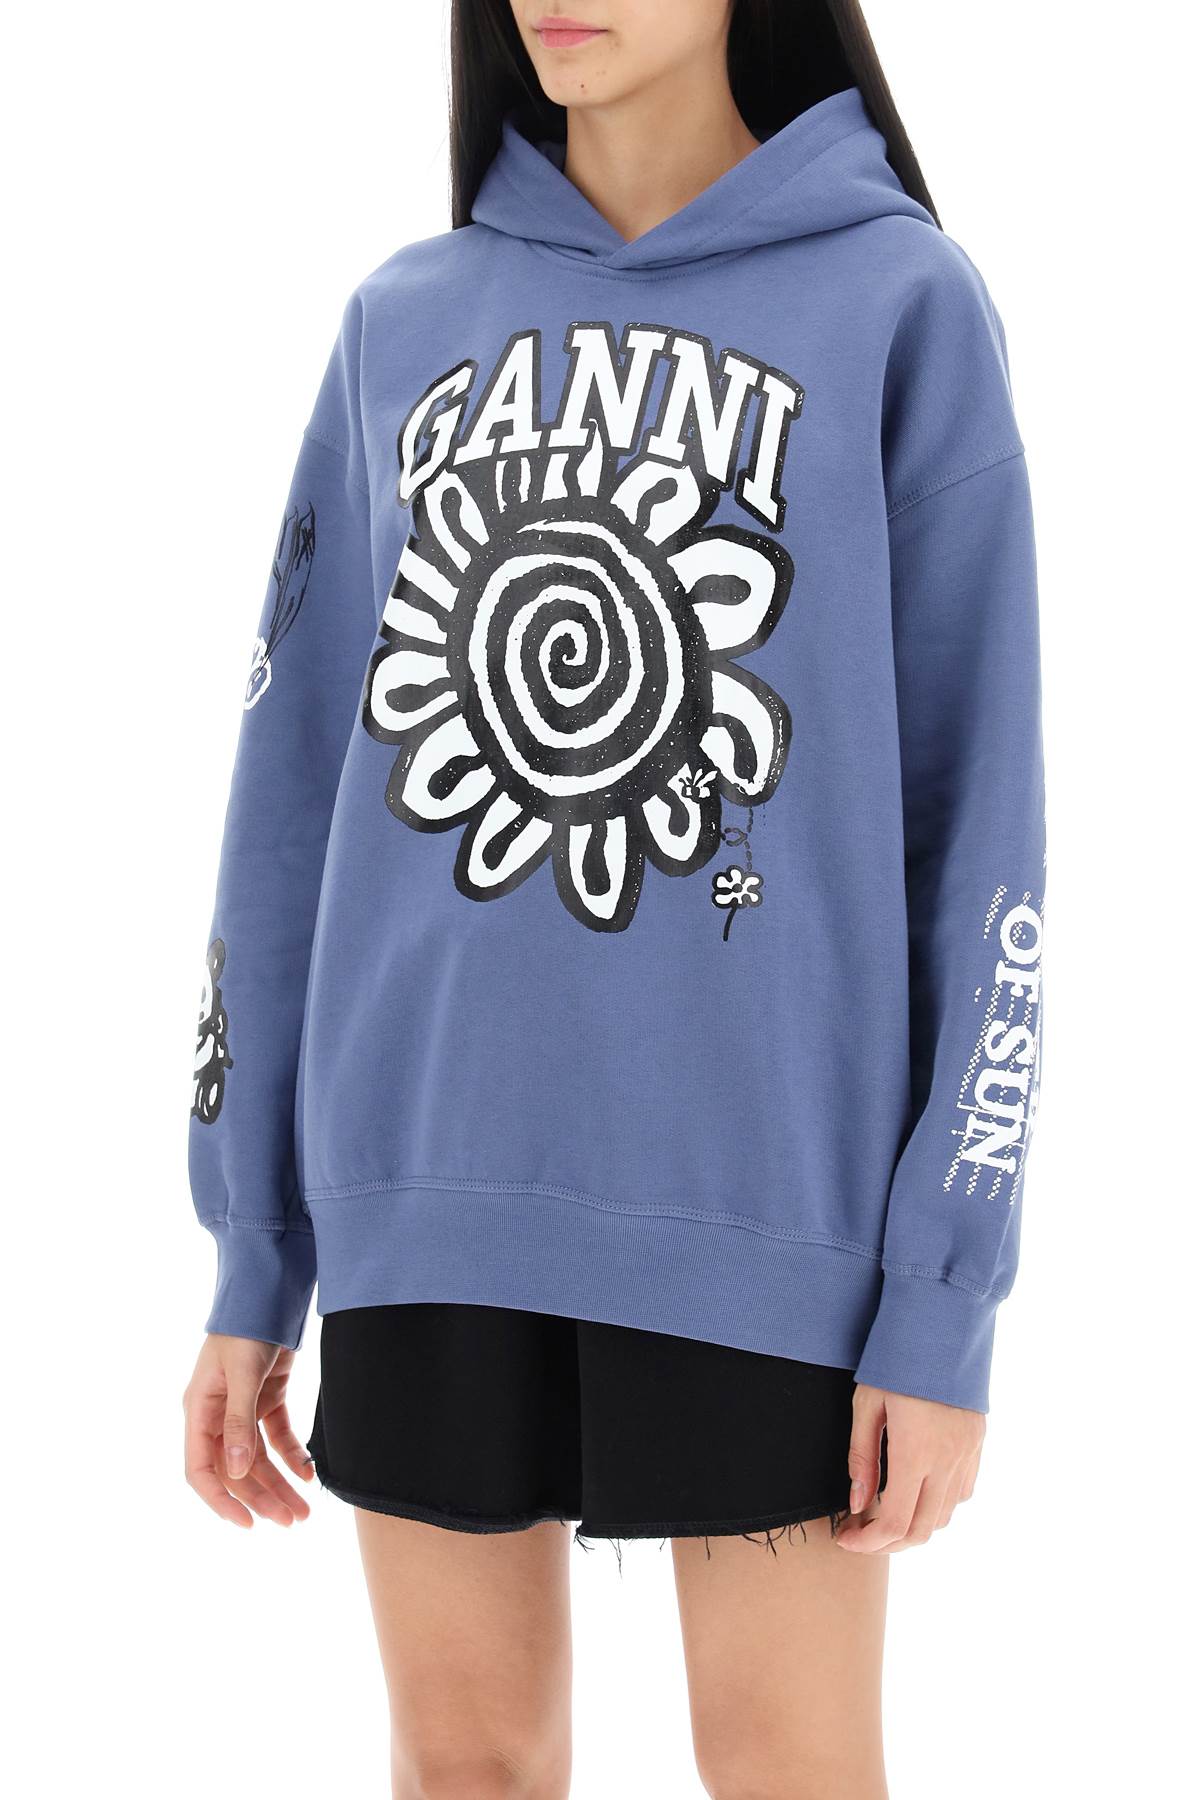 Ganni hoodie with graphic prints-3